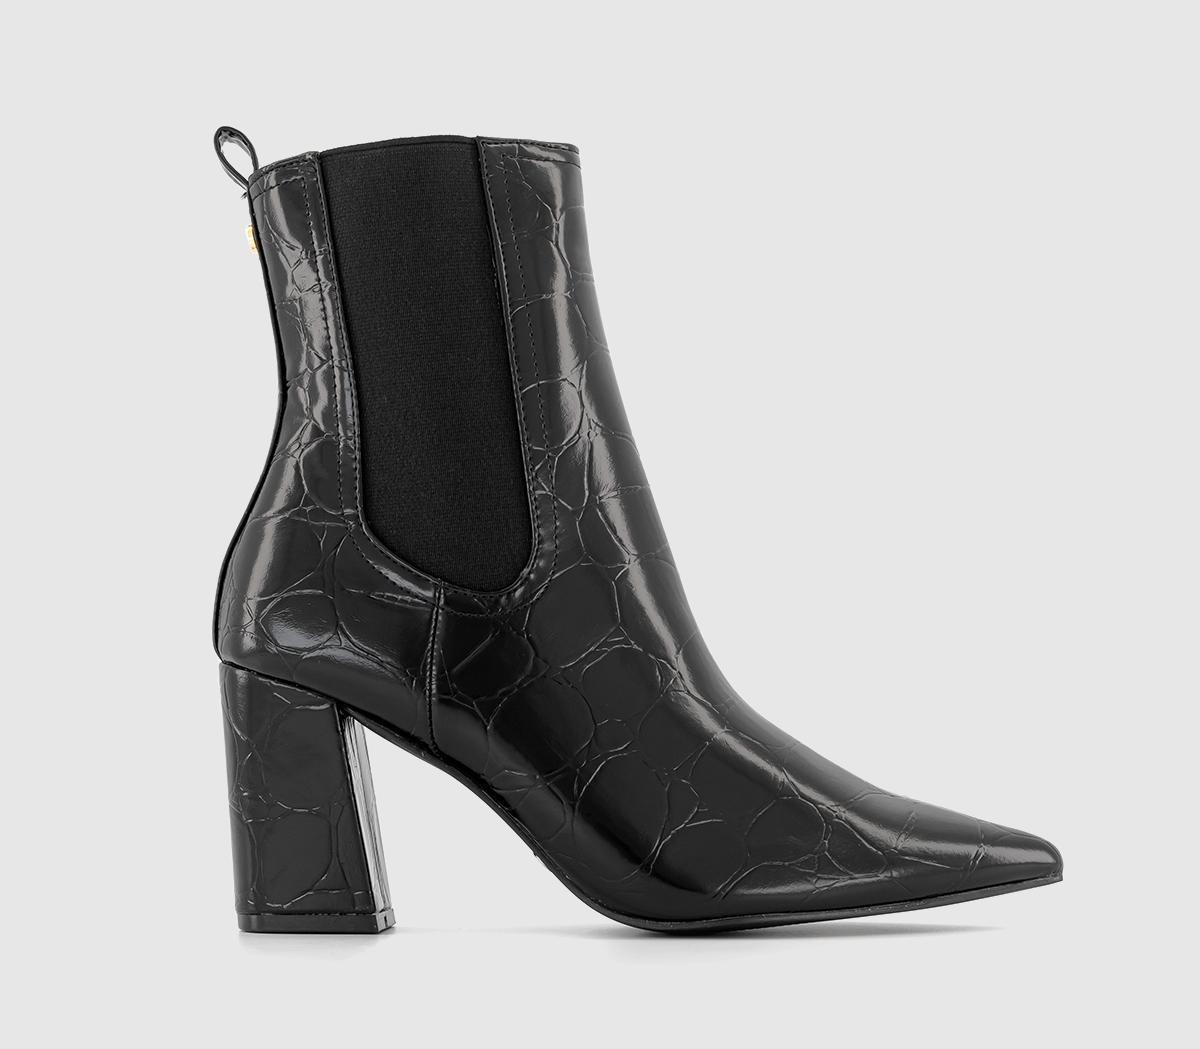 OFFICE Advance Pointed Toe Chelsea Boots Black Patent Croc Embossed ...